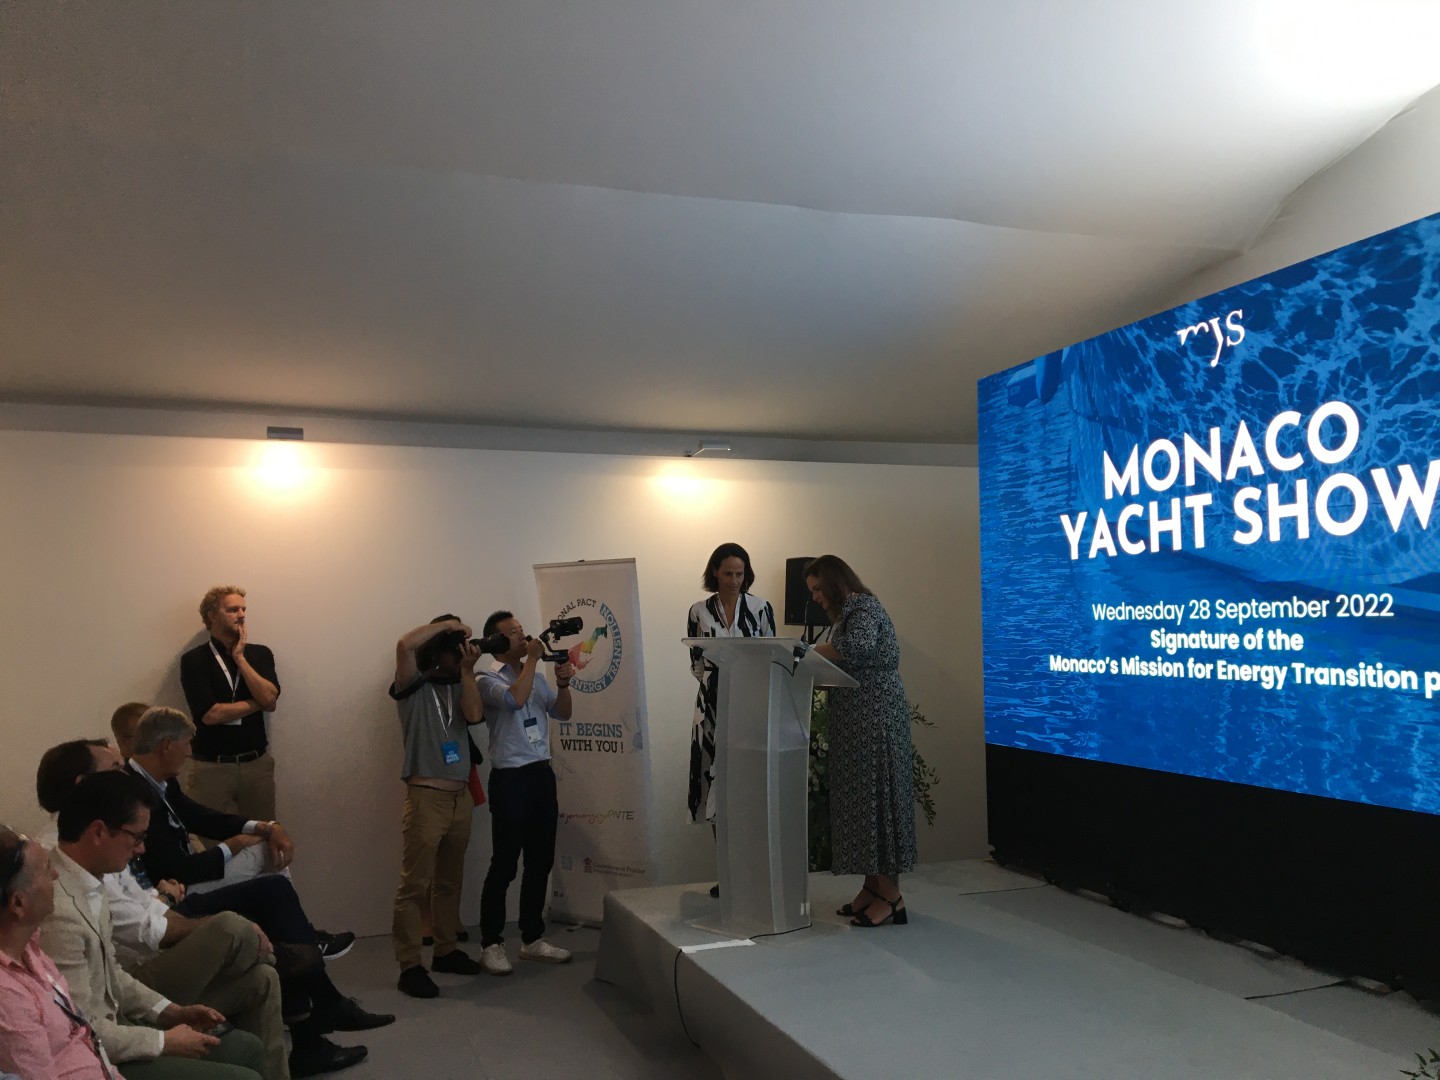 Sustainability Conference at the Monaco Yacht Show